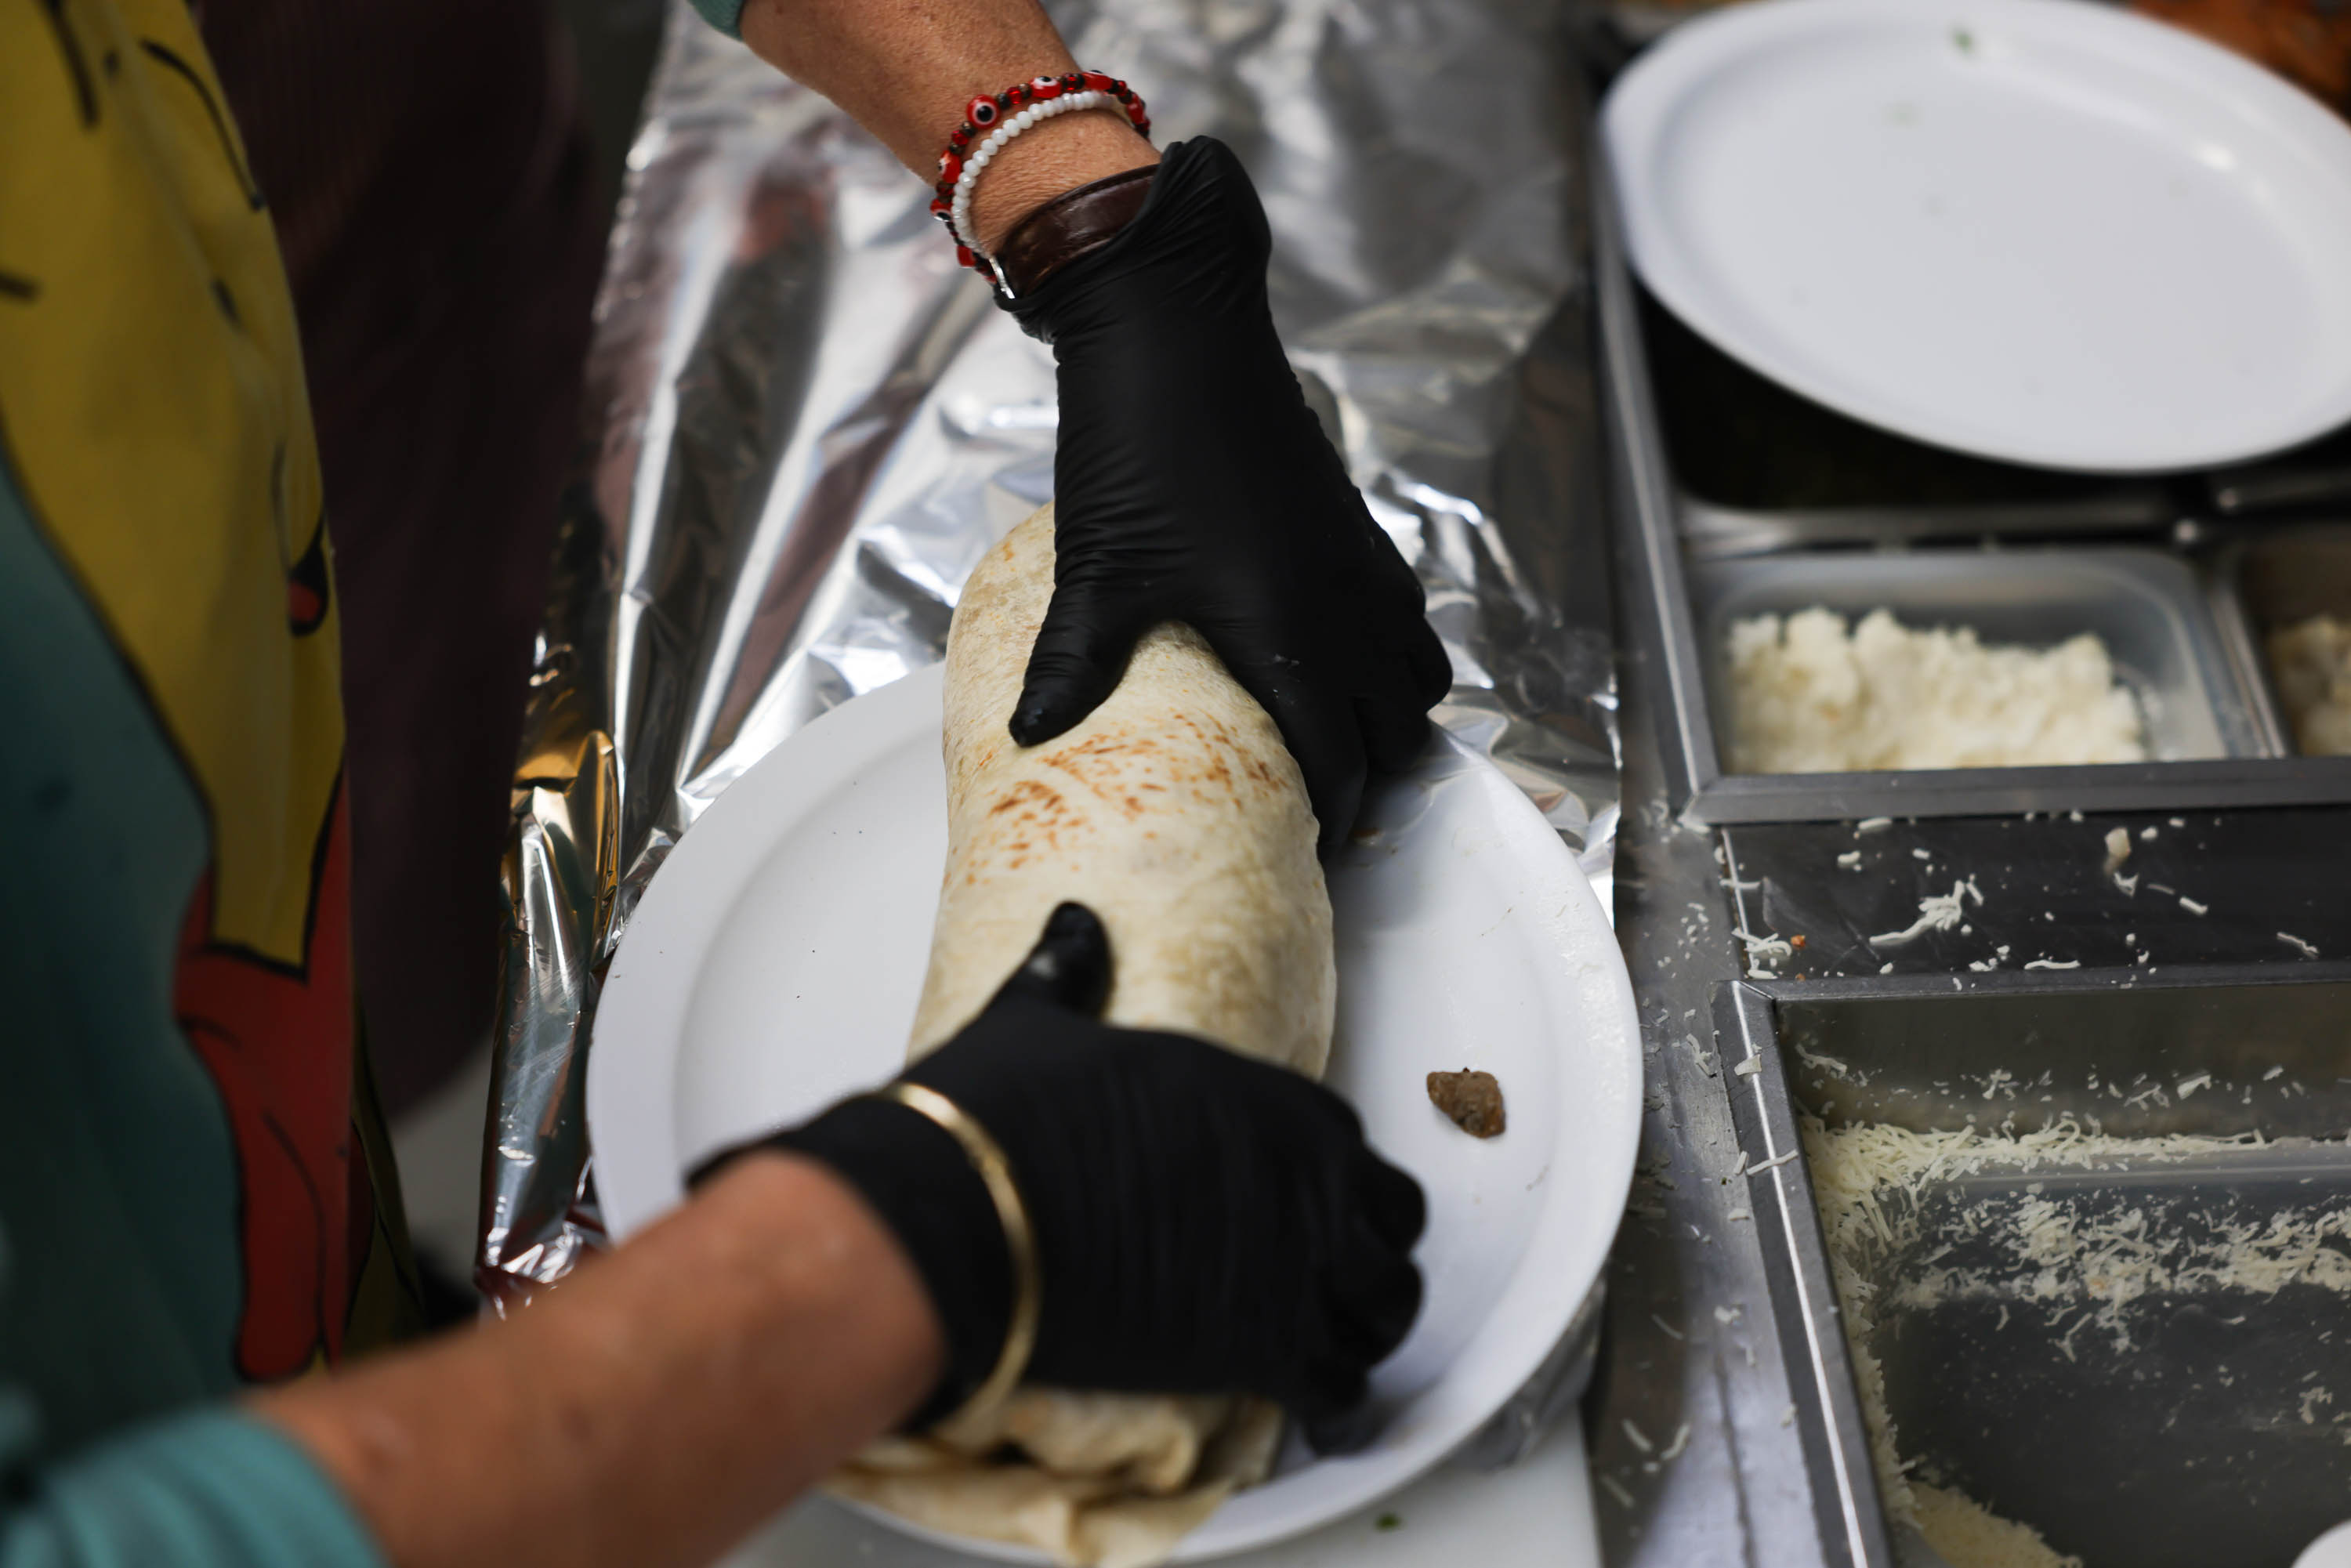 Hands in black gloves roll a burrito on a white plate in a kitchen with ingredients nearby.